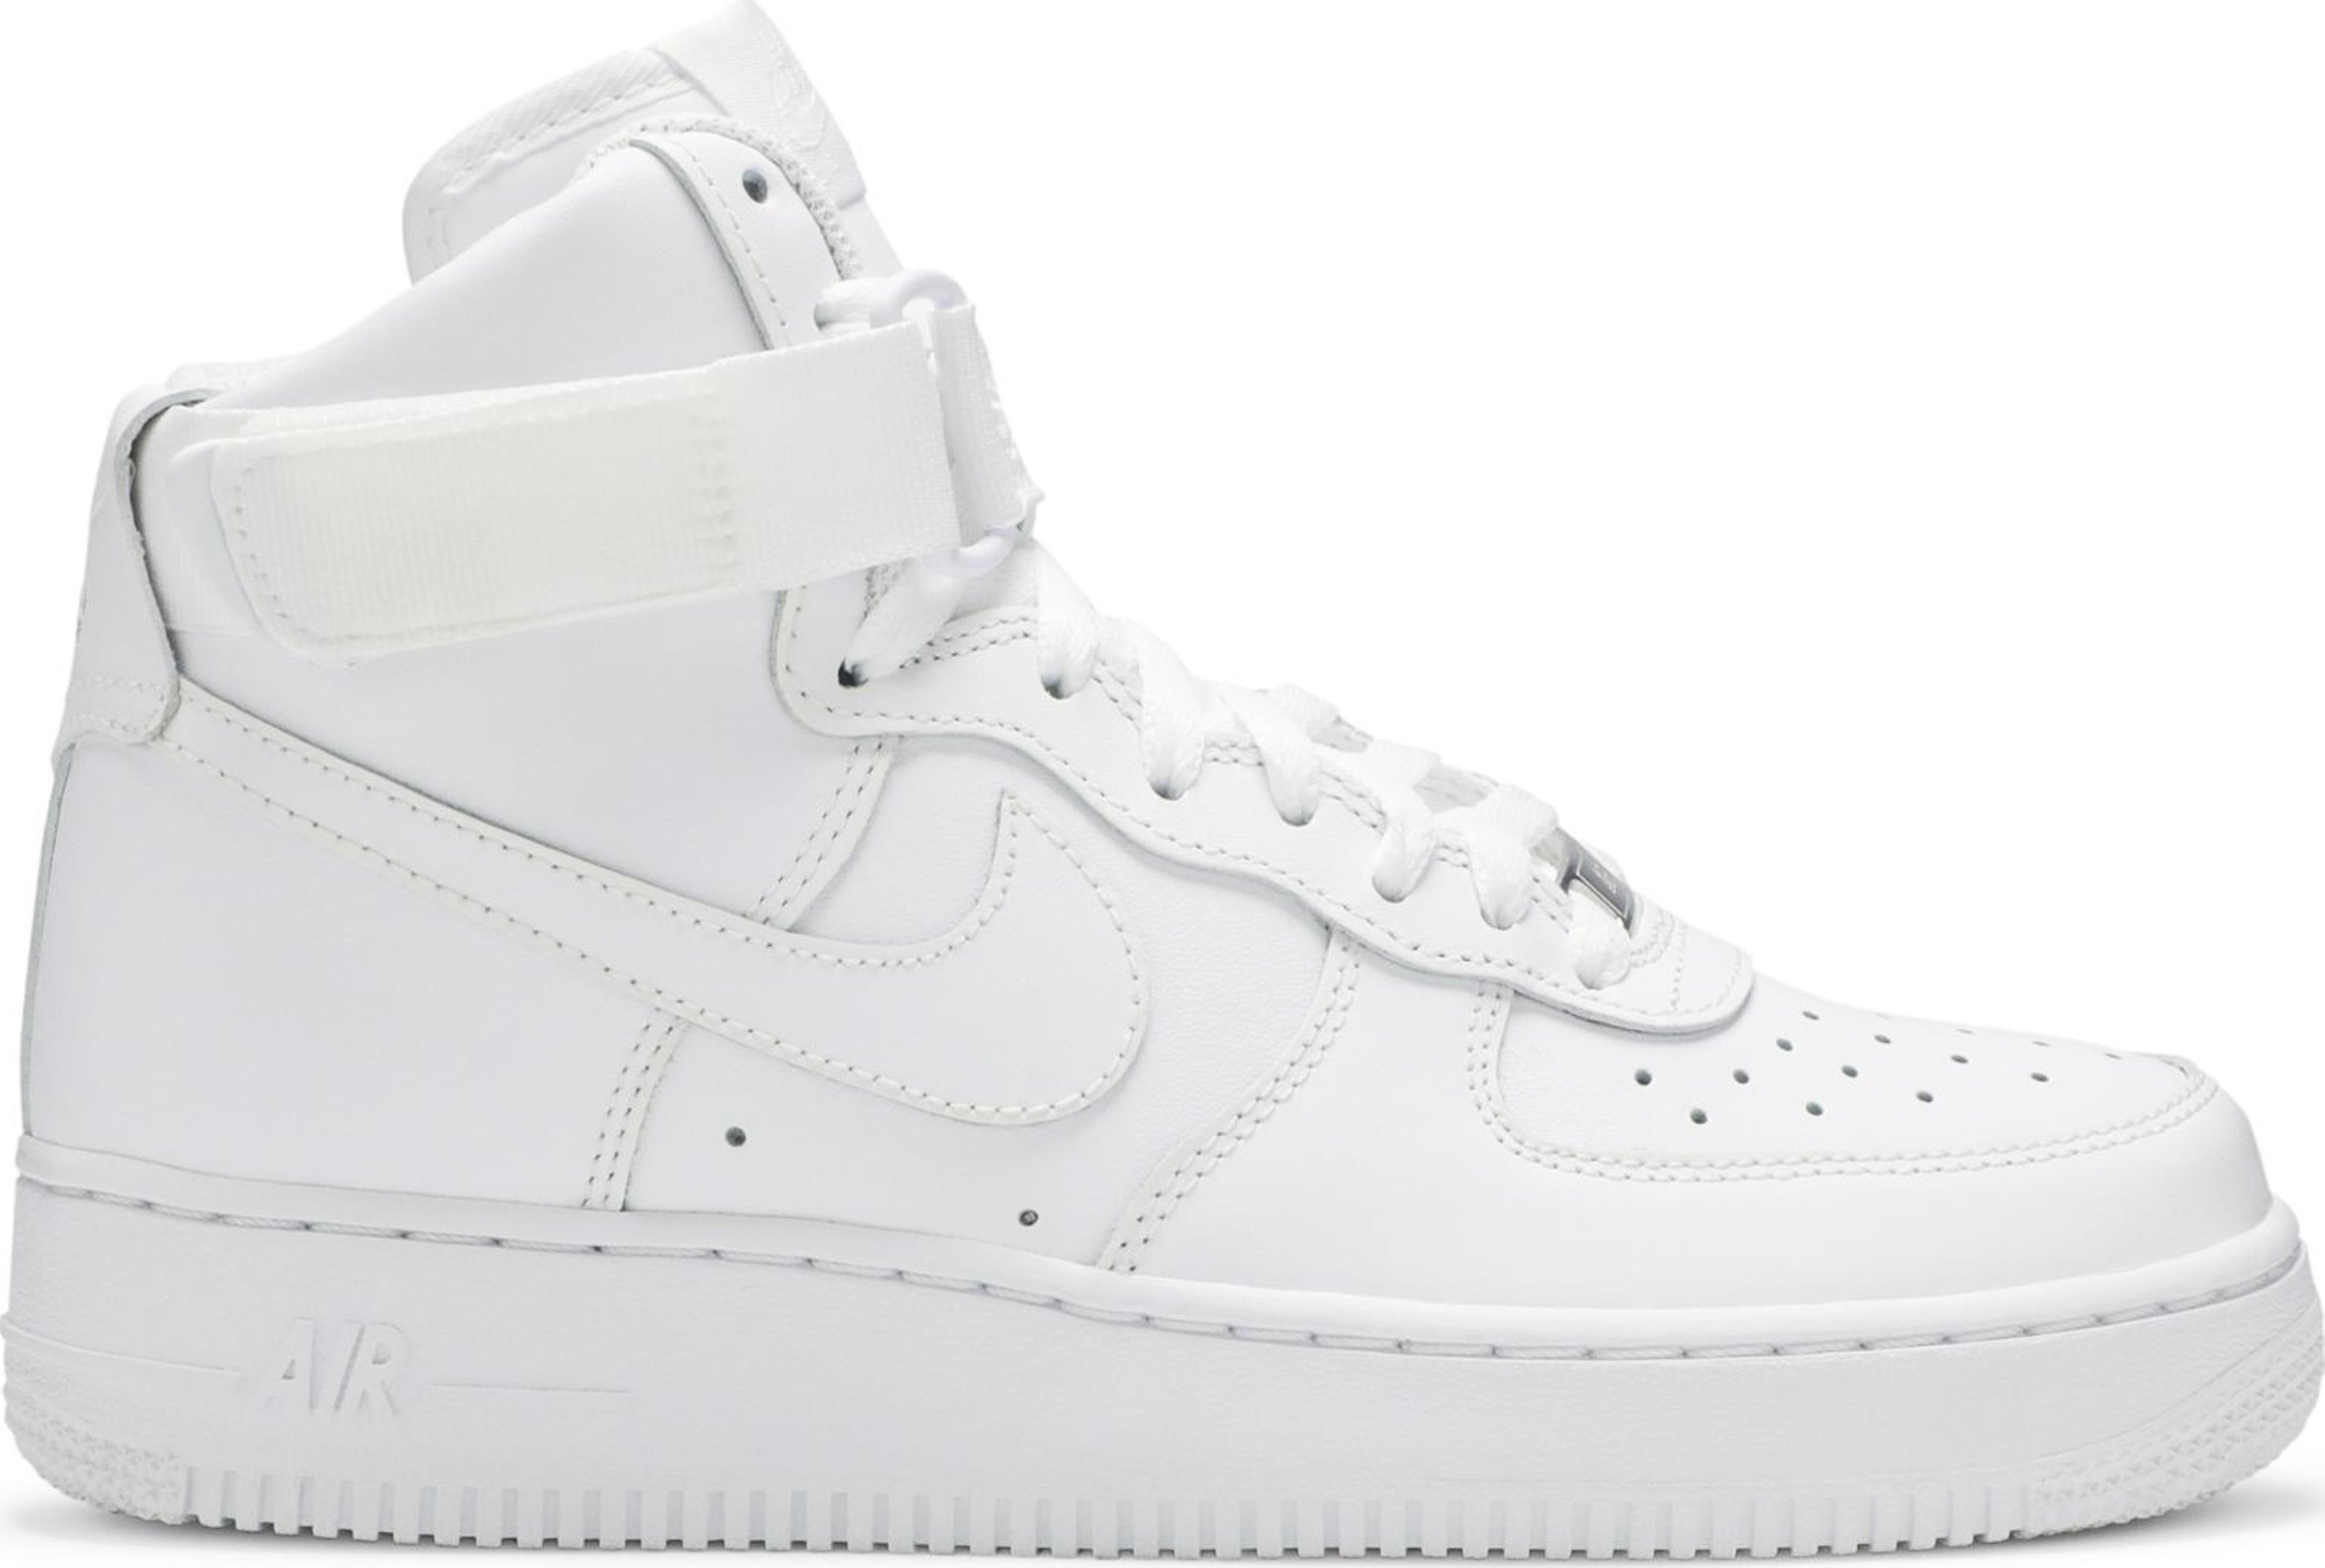 Buy Wmns Air Force 1 High 'White' - 334031 105 | GOAT